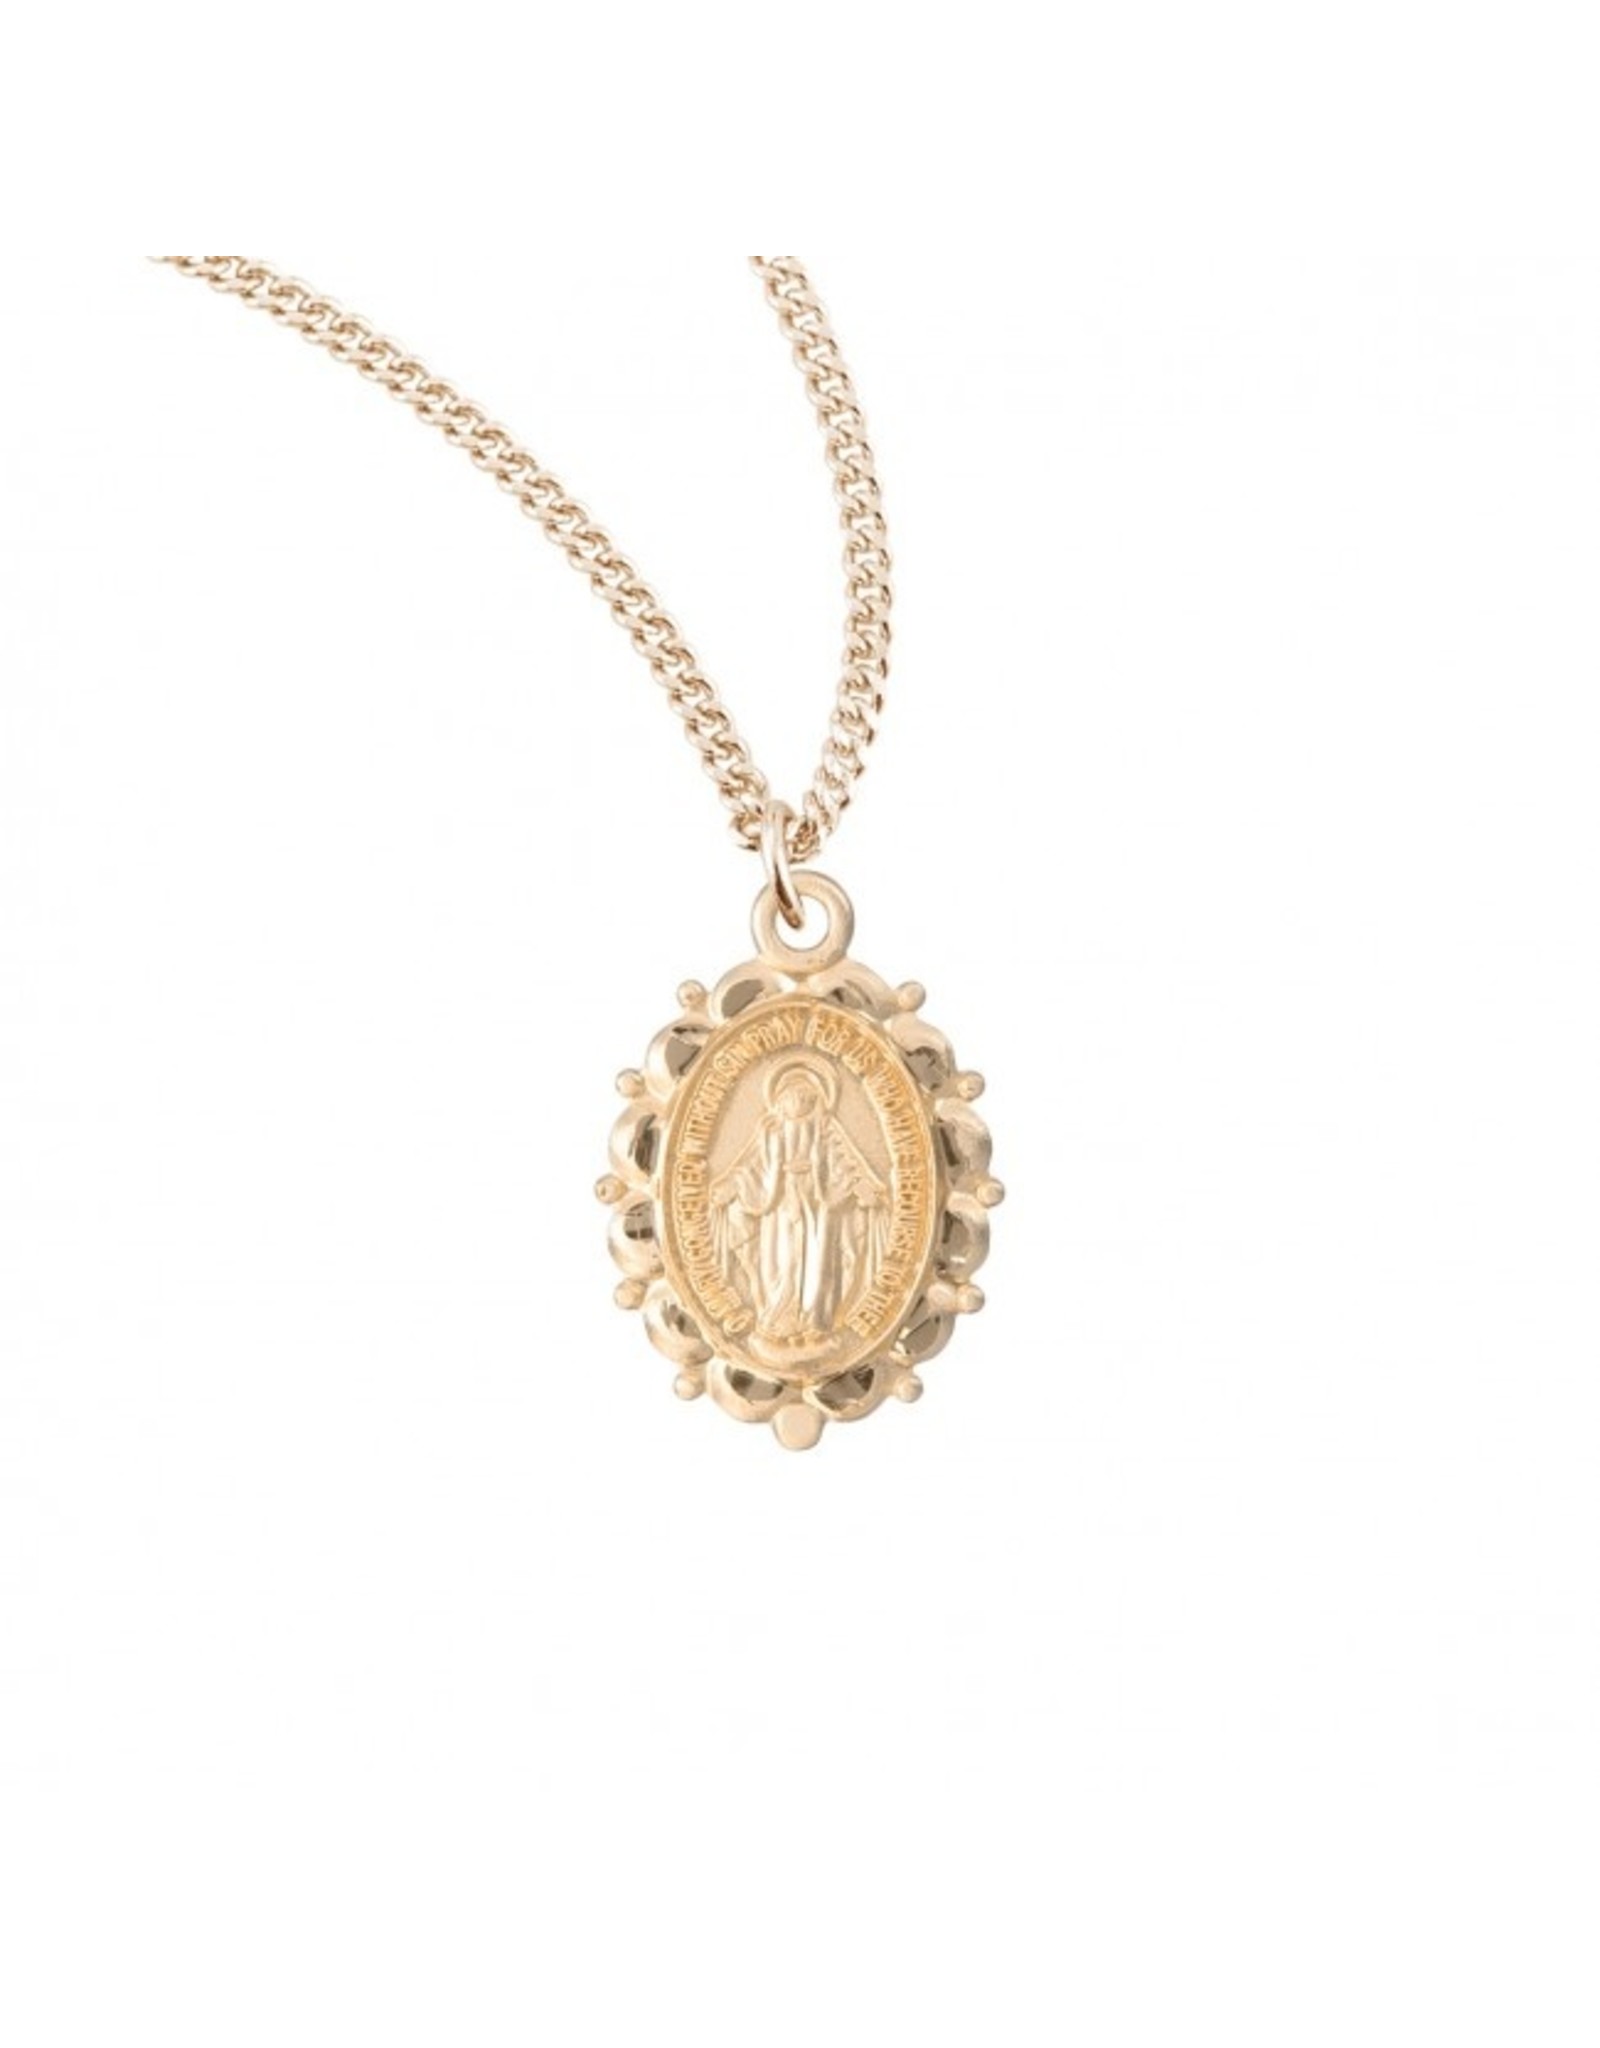 HMH Miraculous Medal, Scalloped Oval, Gold over Sterling Silver, 18" Chain